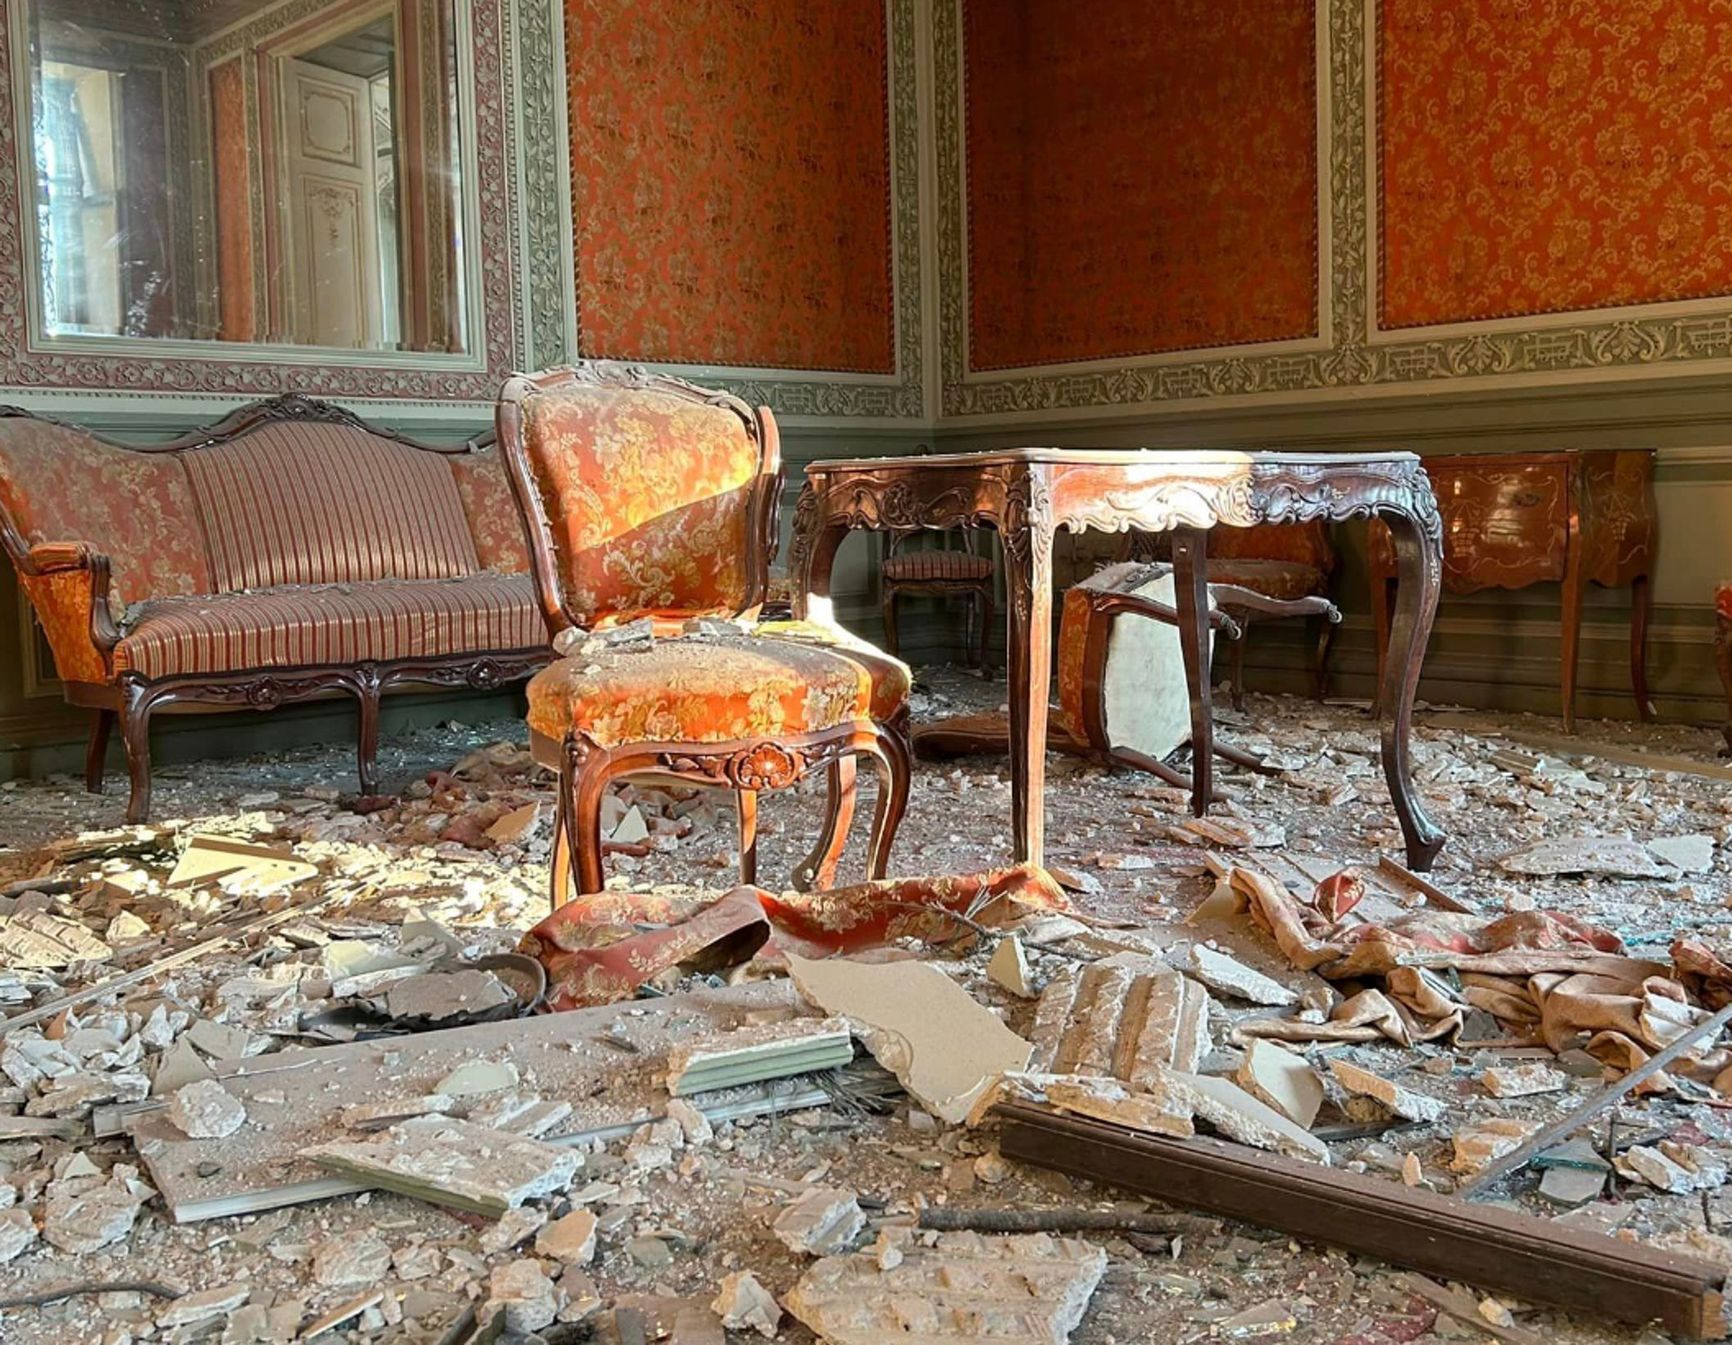 Aftermath of shelling at the House of Scientists